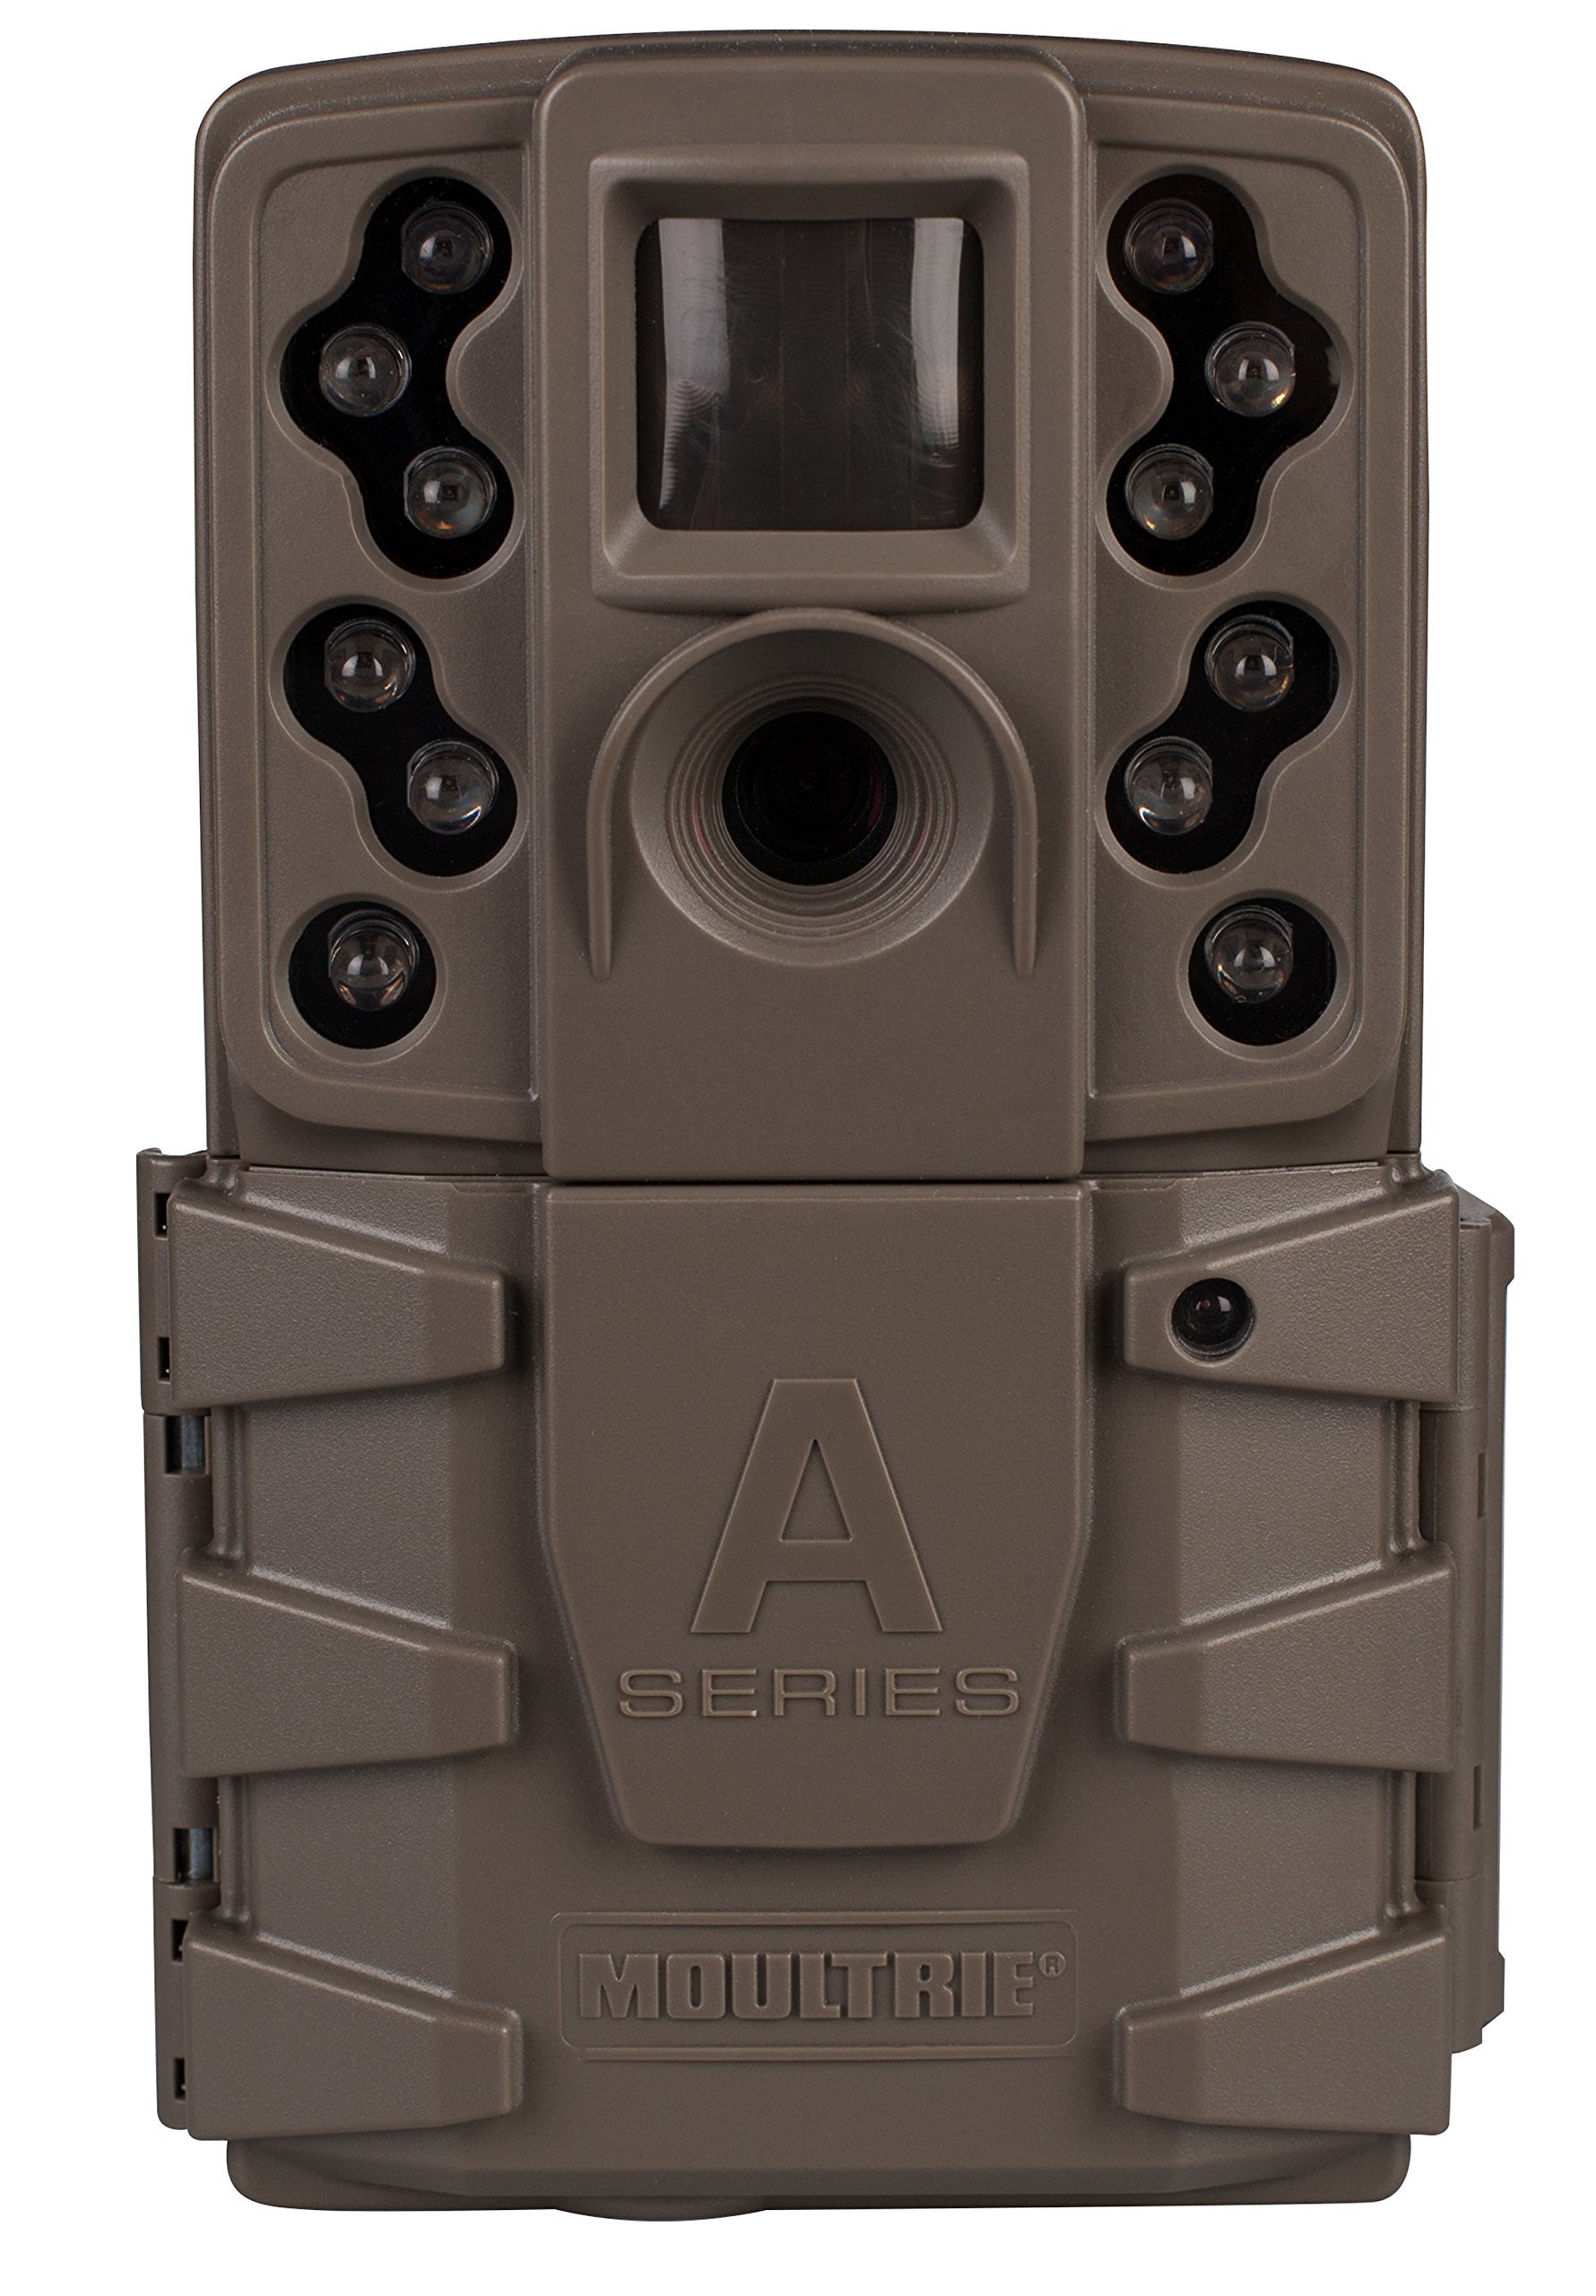 Book Cover Moultrie A-25 Game Camera (2018) | A-Series| 12 MP | 0.9 S Trigger Speed | 720p Video | Compatible with Moultrie Mobile (sold separately)